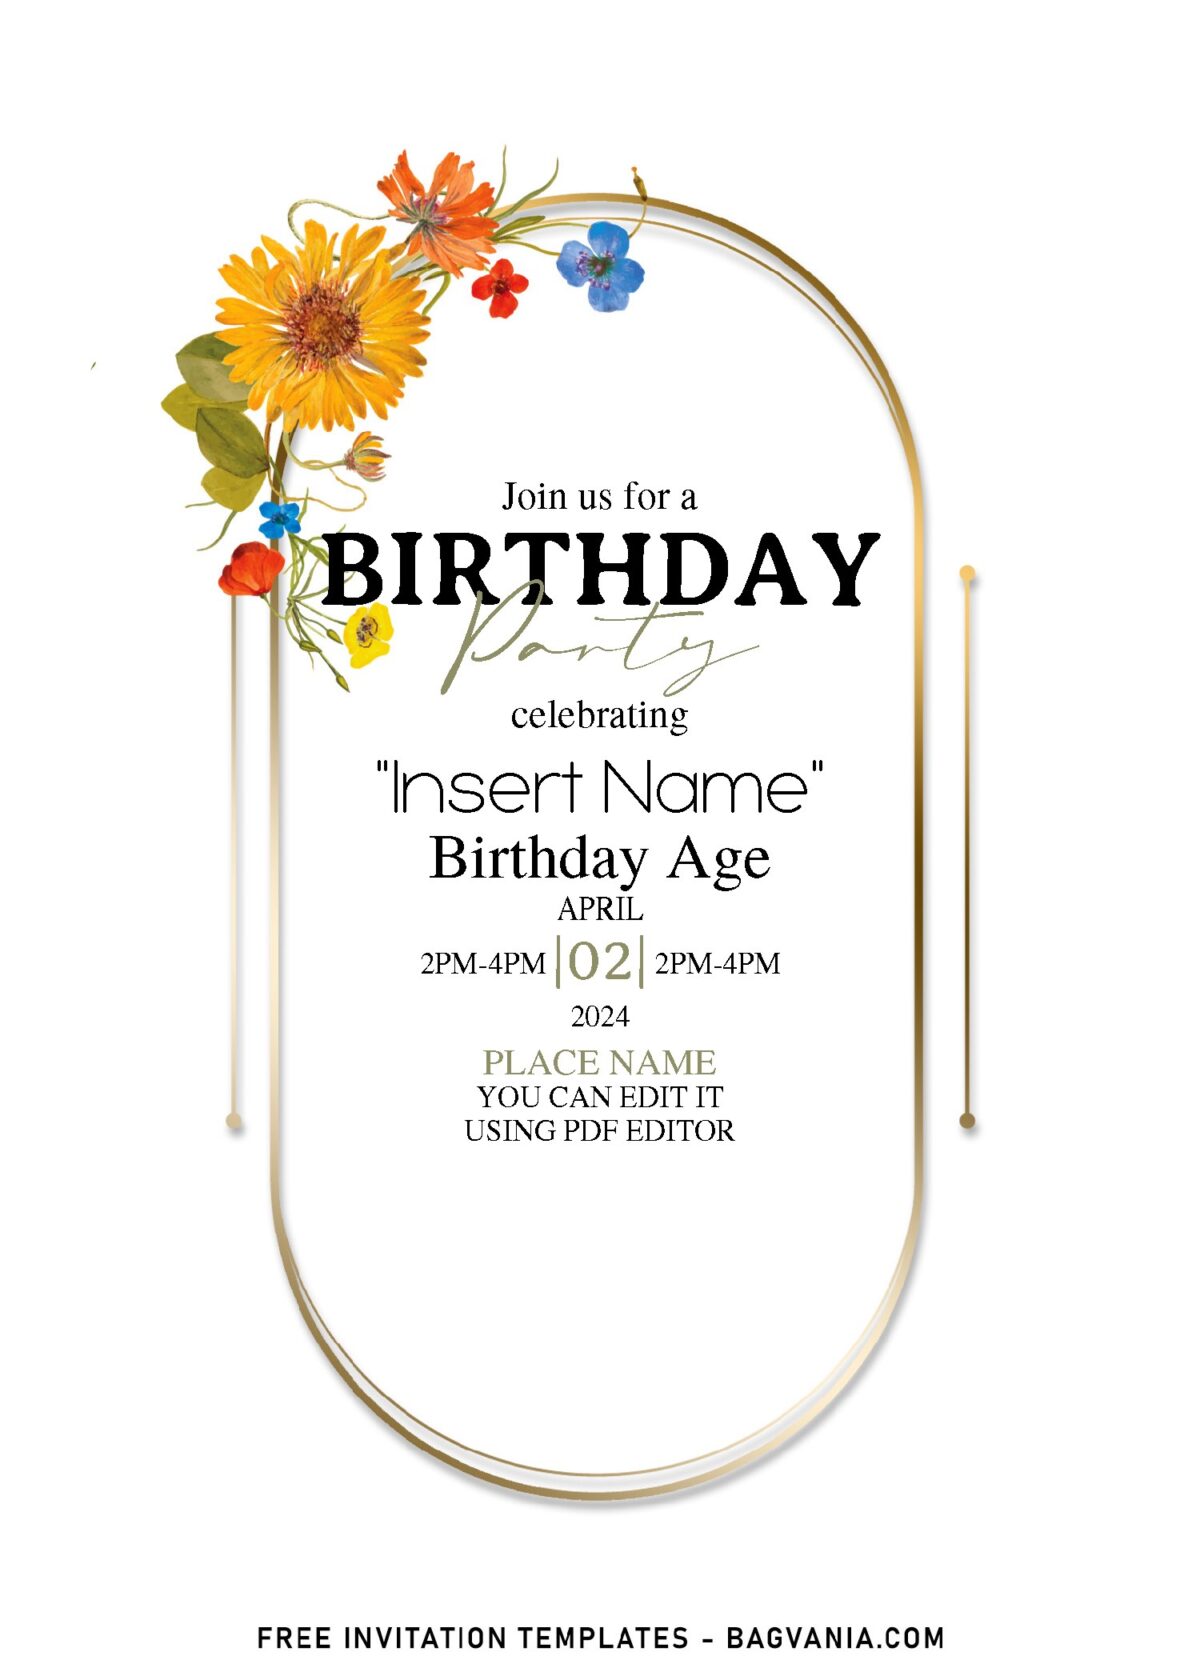 (Free Editable PDF) Whimsical Spring Birthday Invitation Templates with spring sunflower